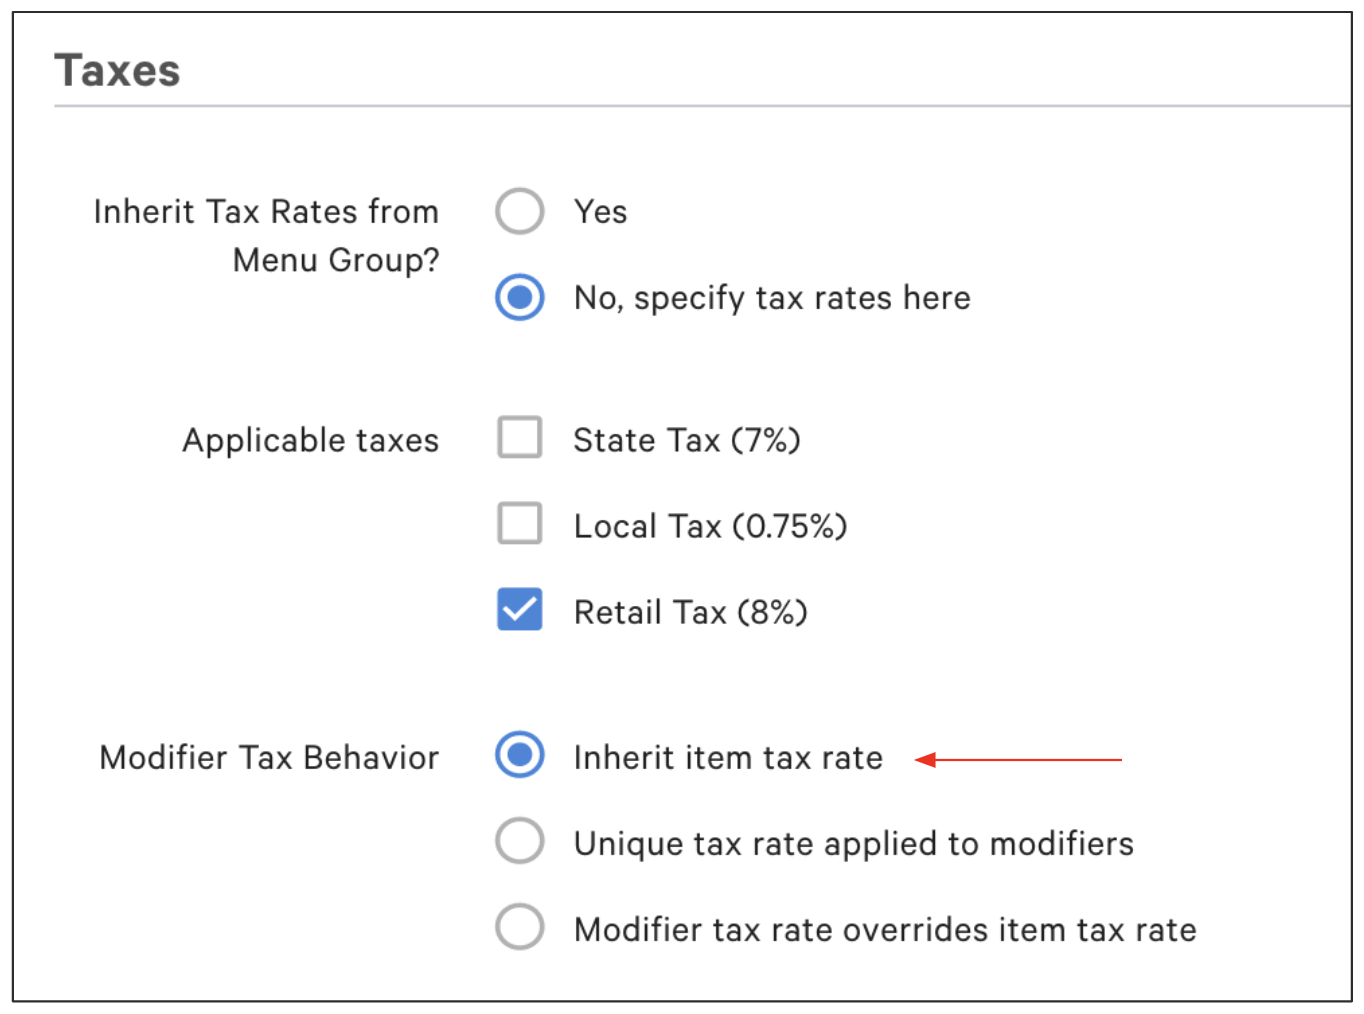 Selecting the unique tax tax rate for the modifier.